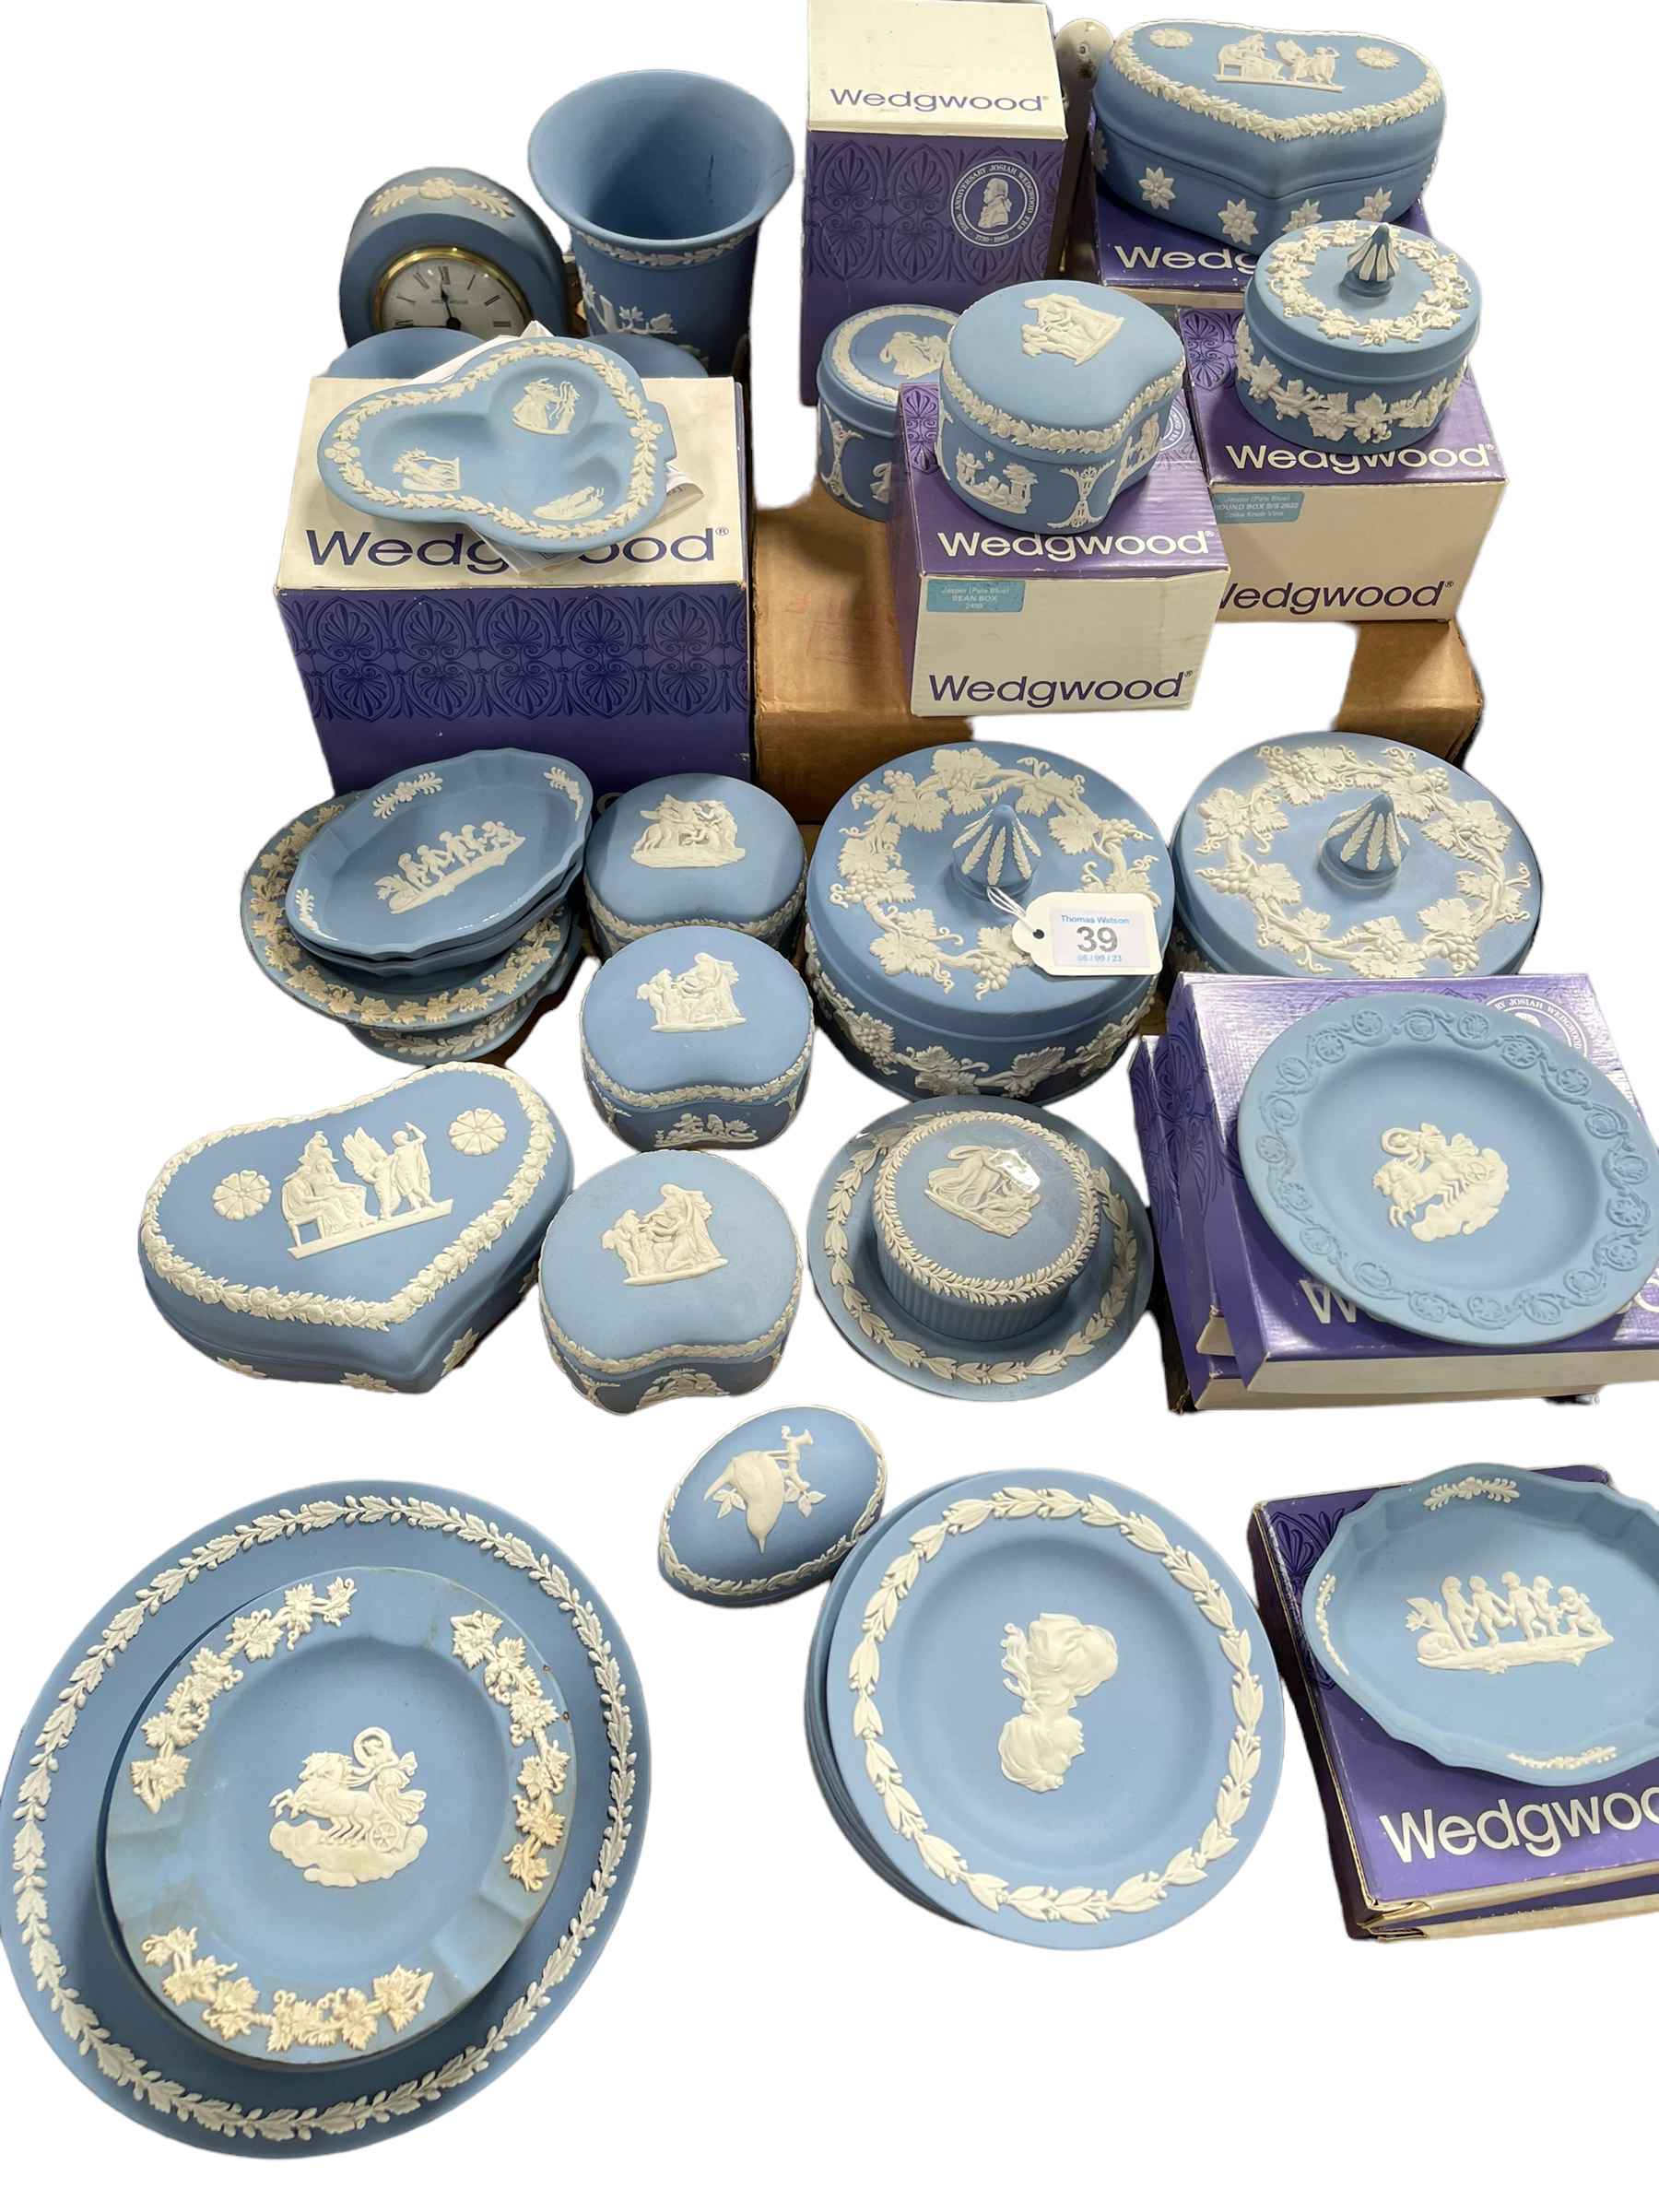 Collection of Wedgwood blue Jasperware, some with boxes.